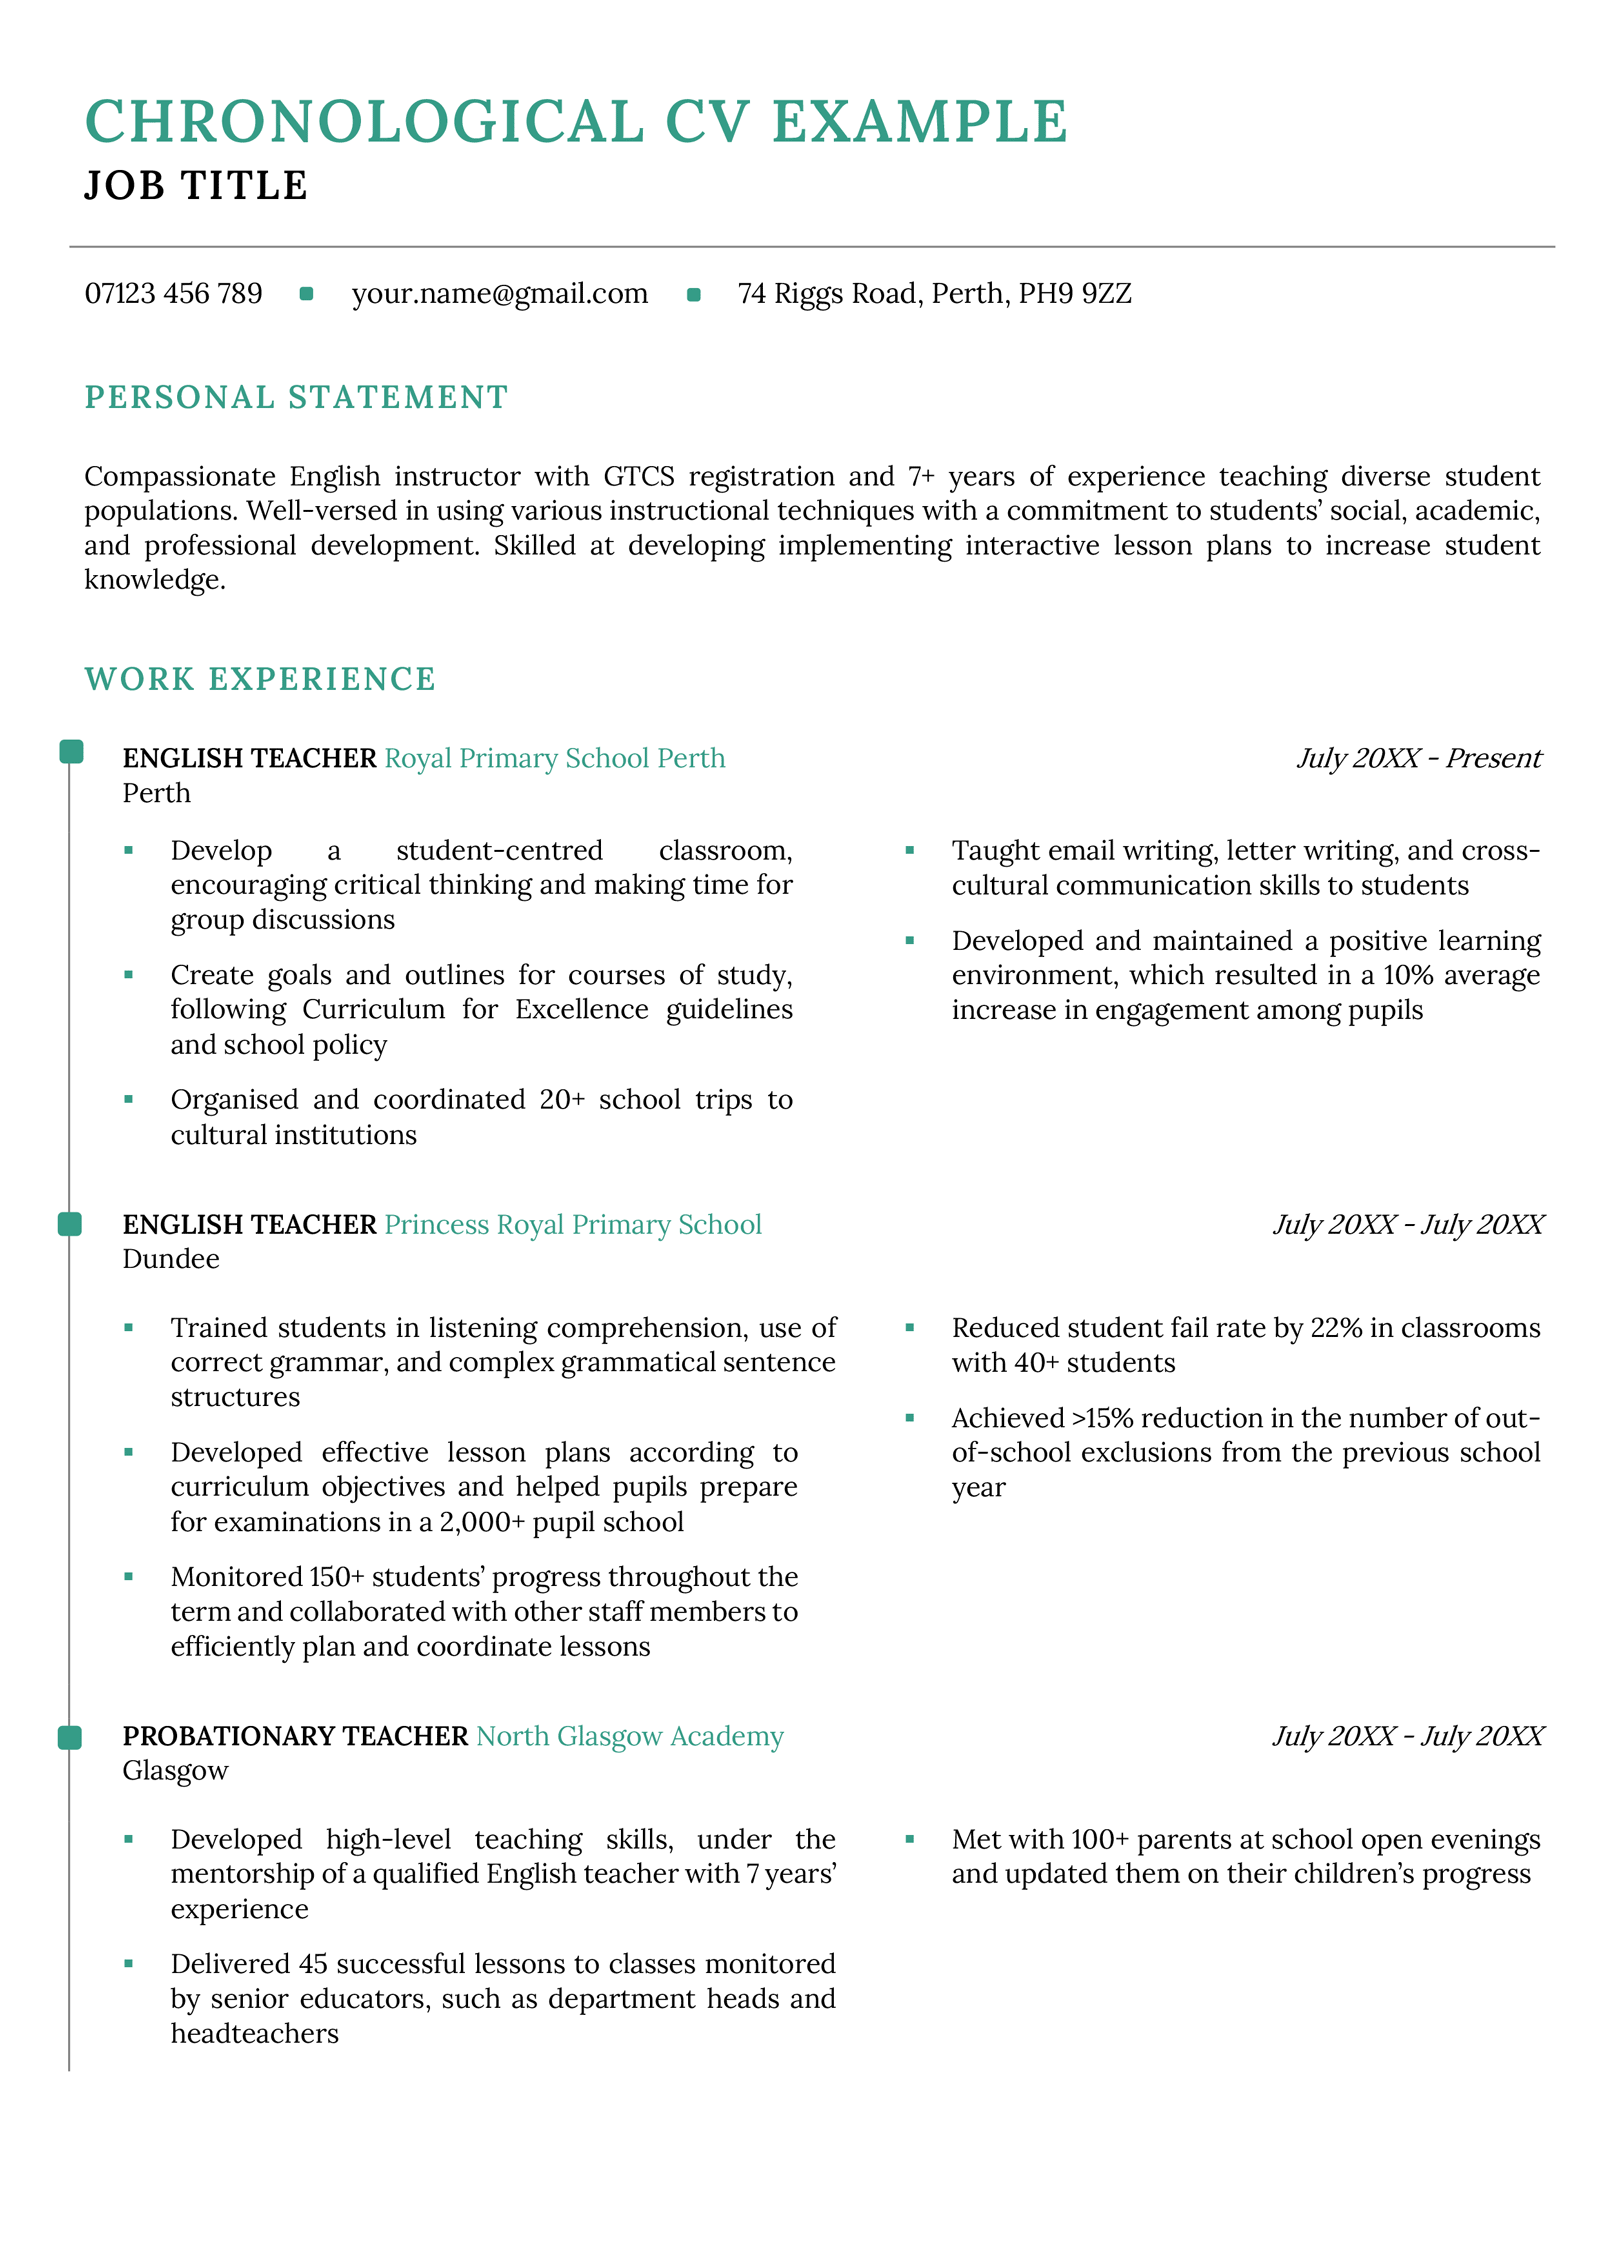 The first page of a UK chronological CV that uses a green colour scheme and two columns to make reading this CV design easier.